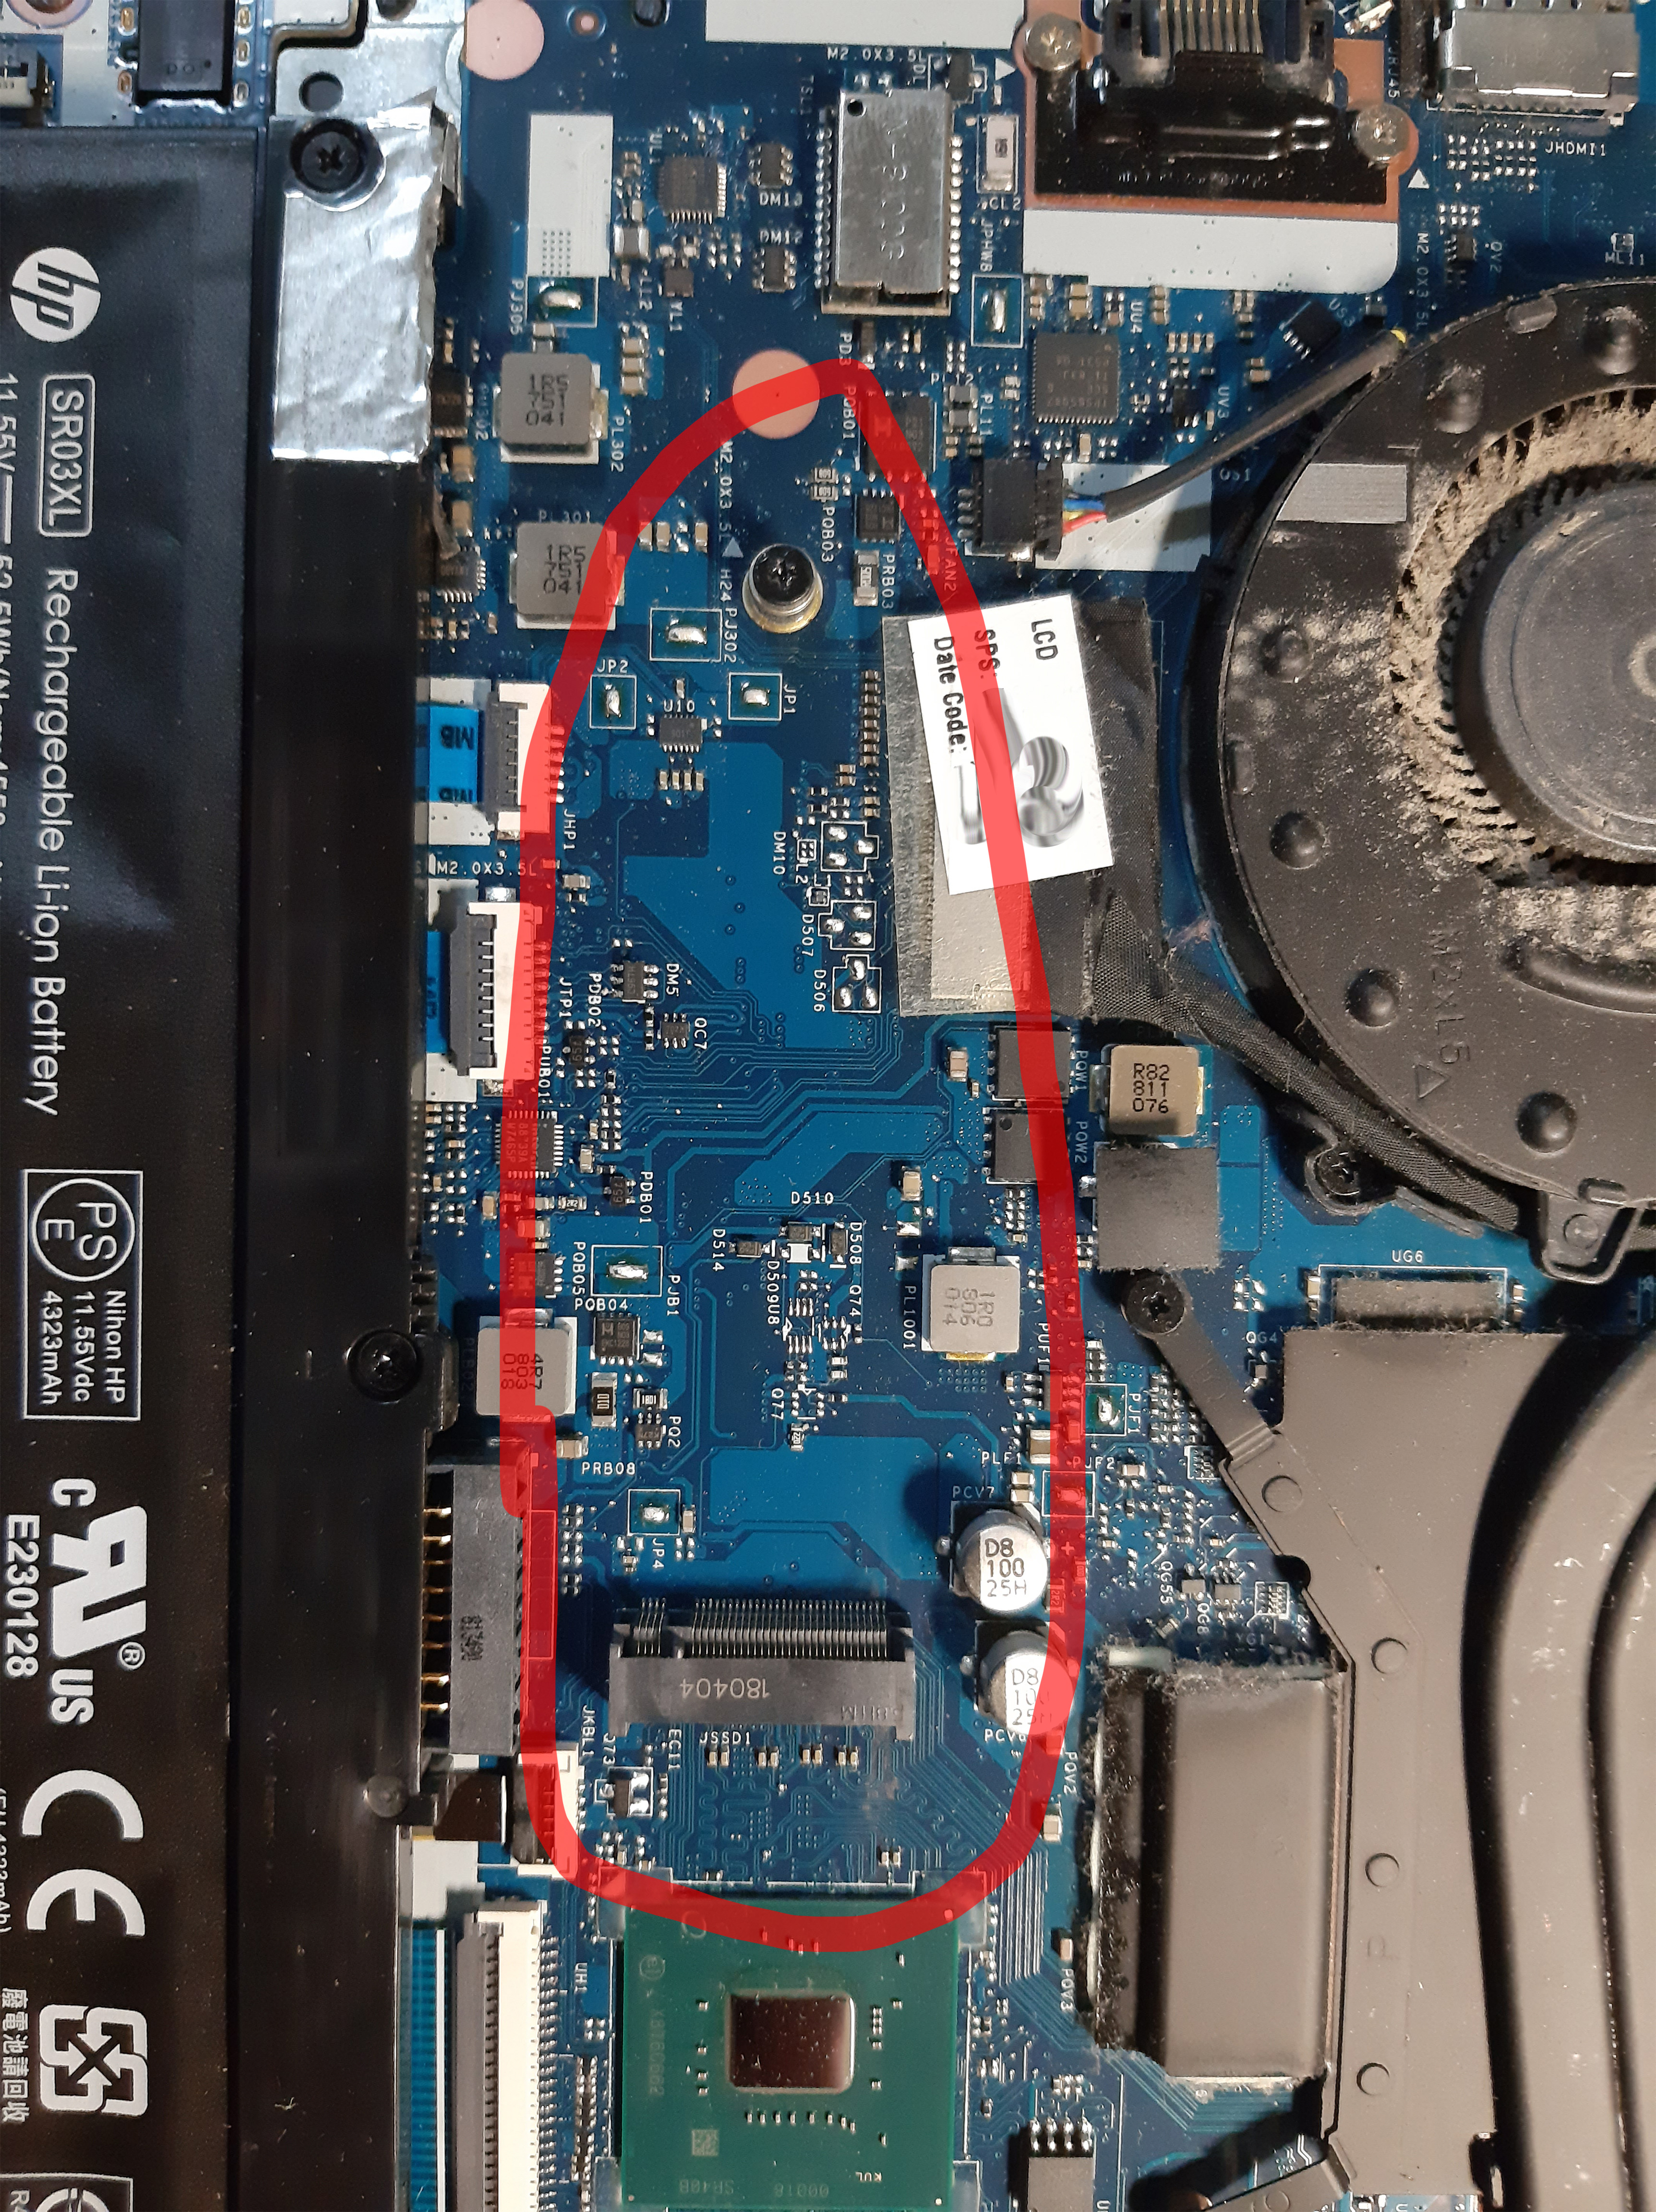 Can I upgrade my laptop with an M.2 SSD? - HP Support Community - 7572527